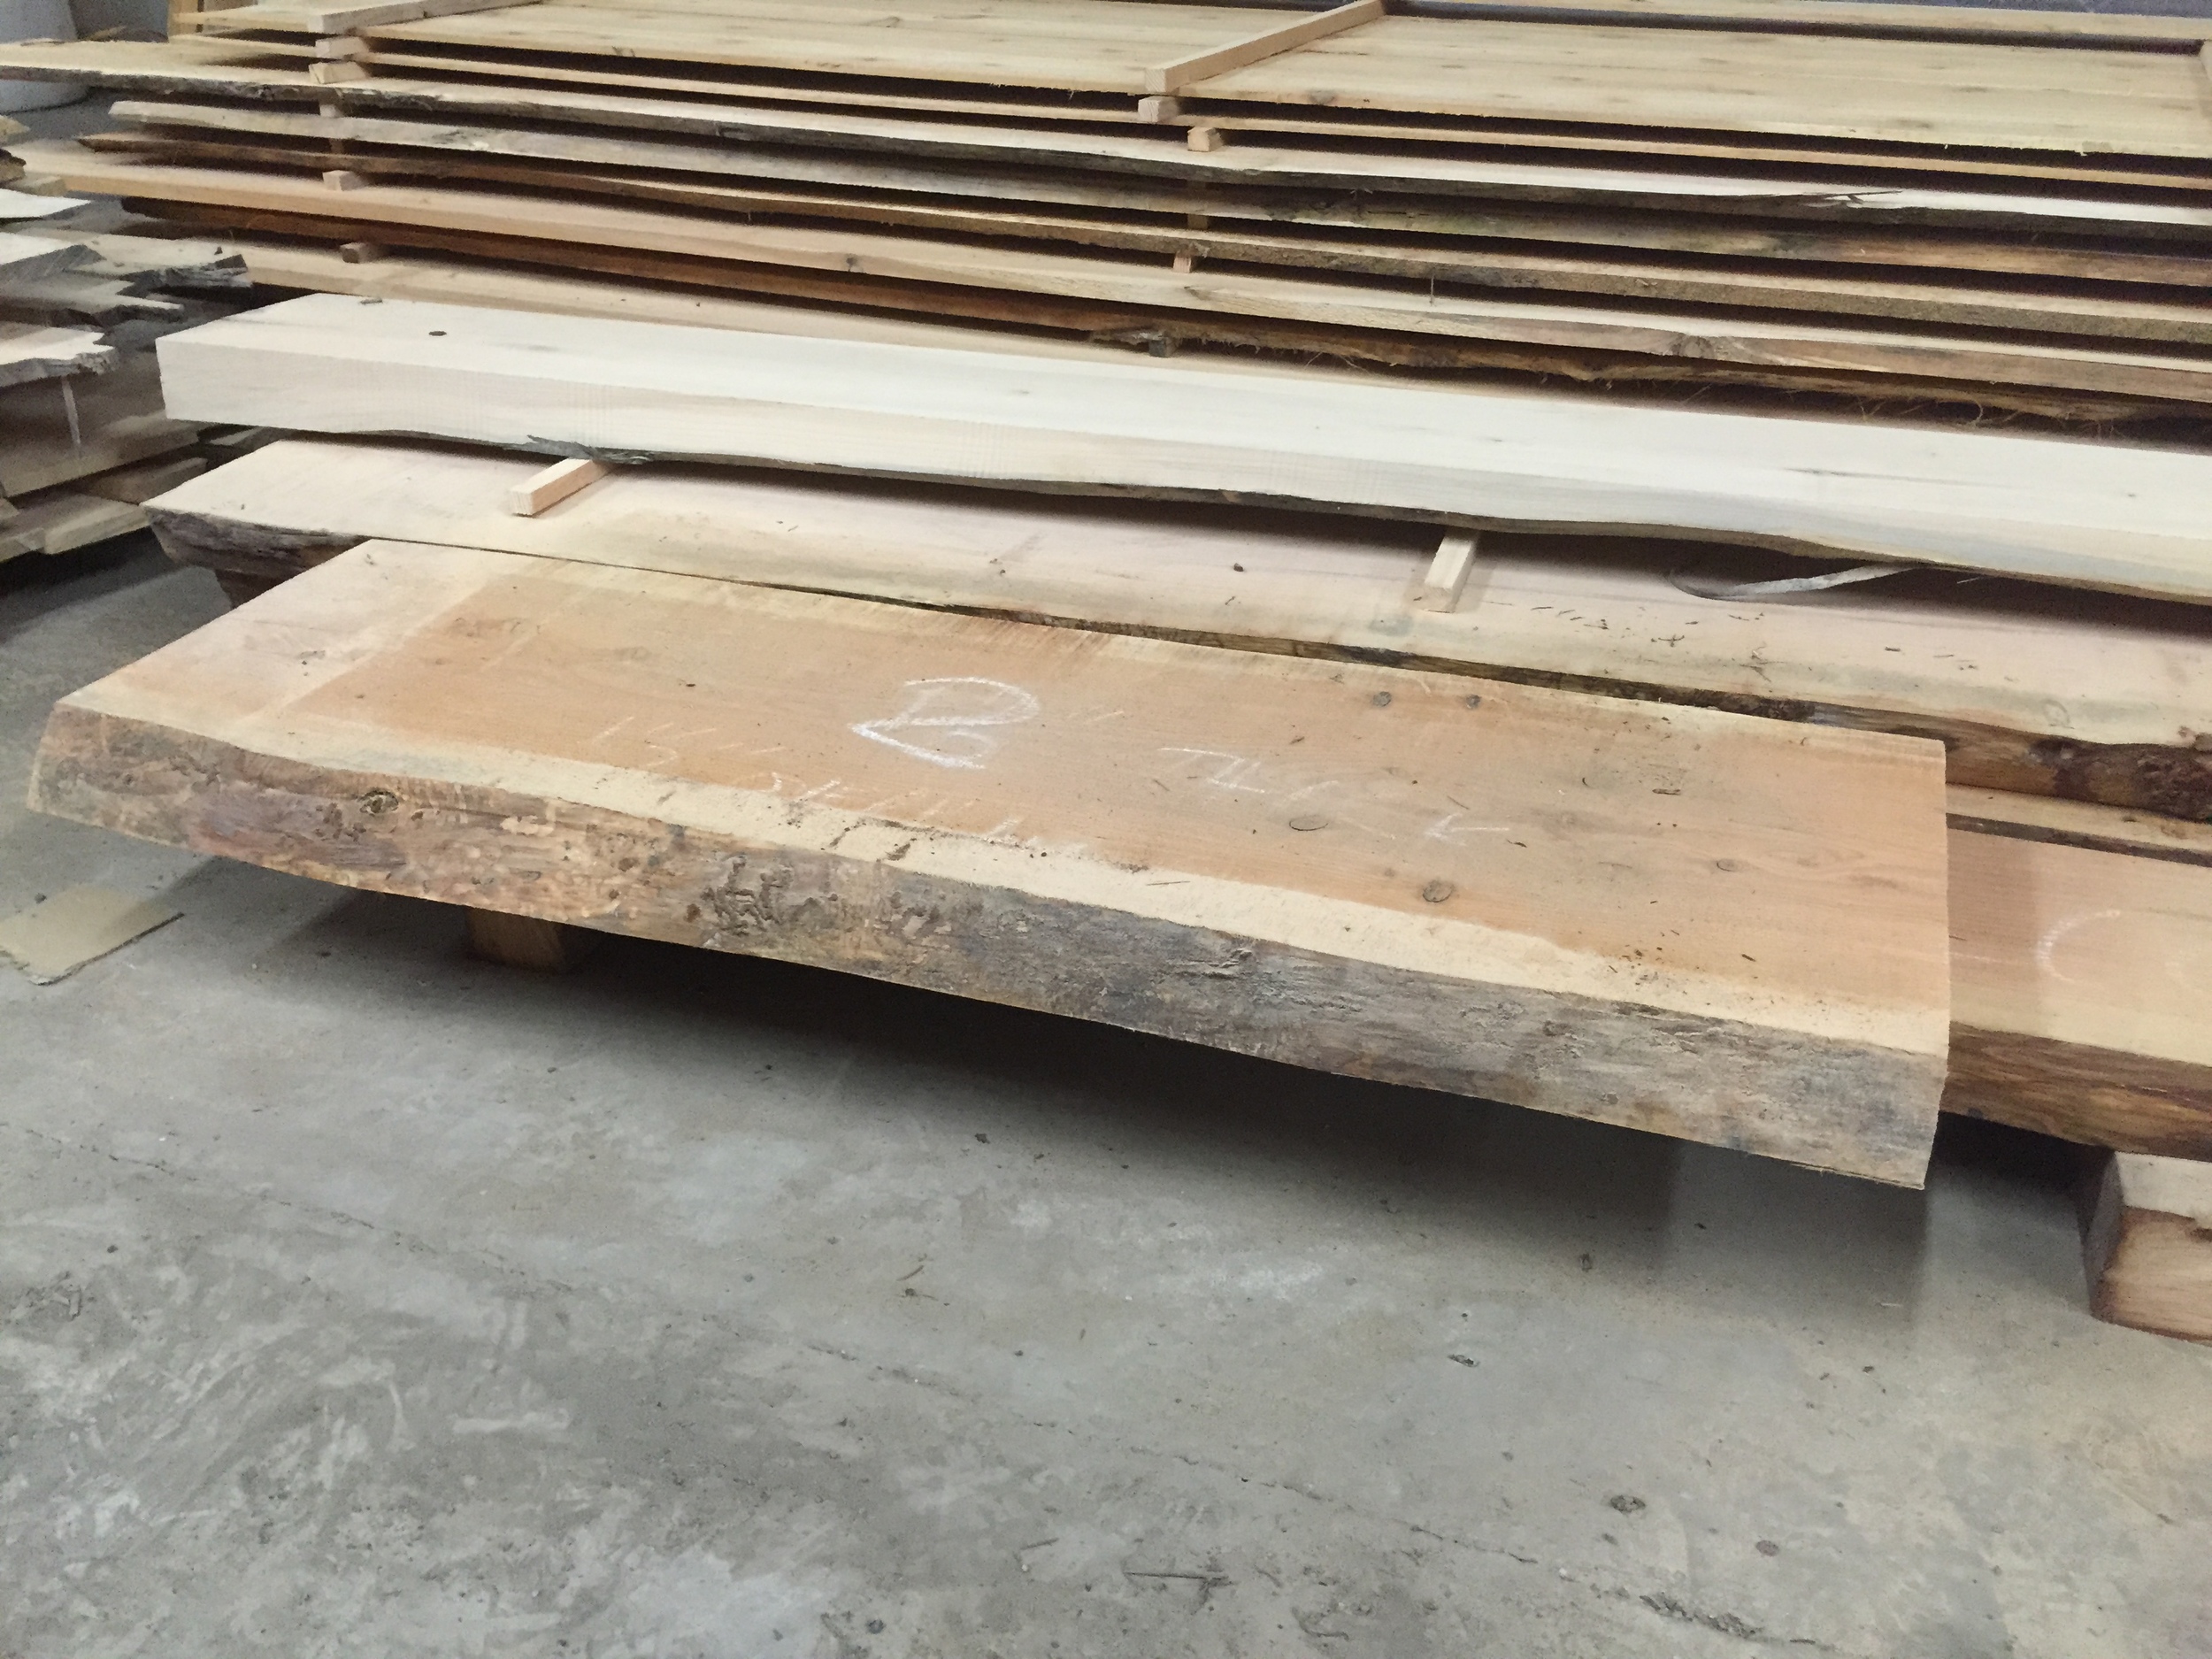   This is what Wayne's table started out like. Just a rough-cut 3 inch piece of Douglas Fir.  &nbsp;  